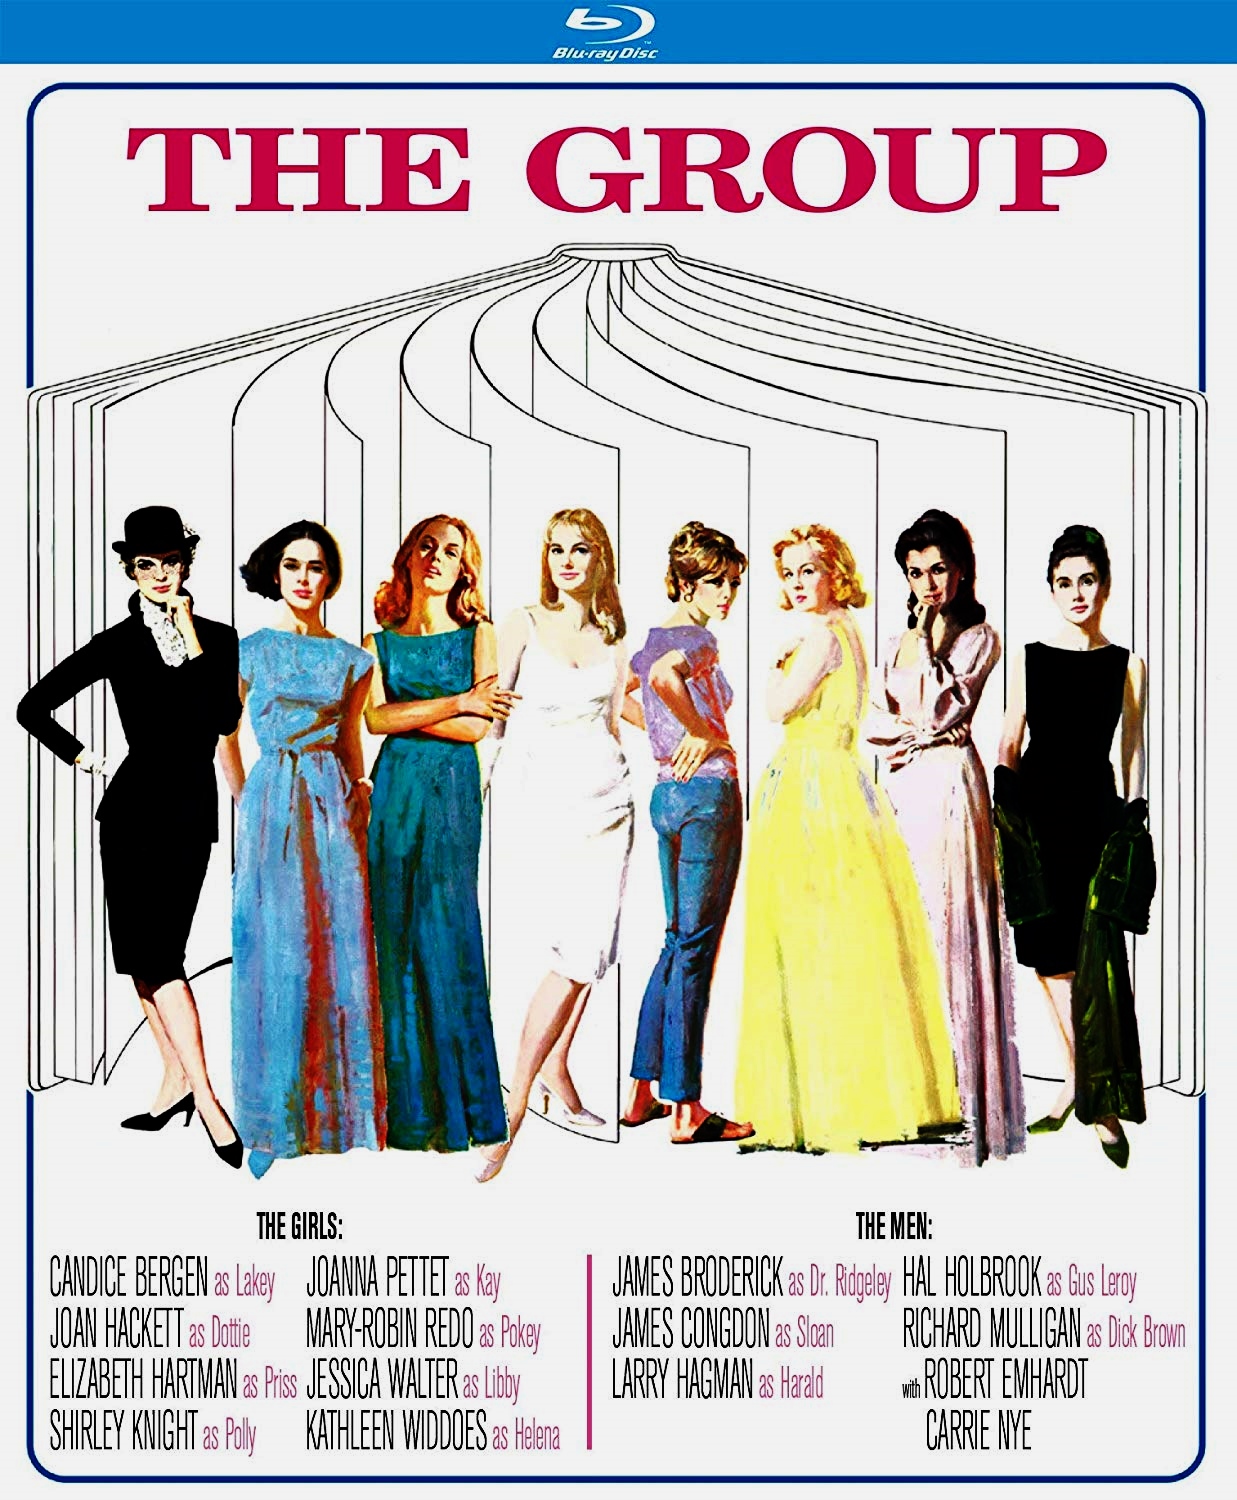 THE GROUP Blu-ray (UA/Famartists Productions S.A., 1966) Kino Lorber pic